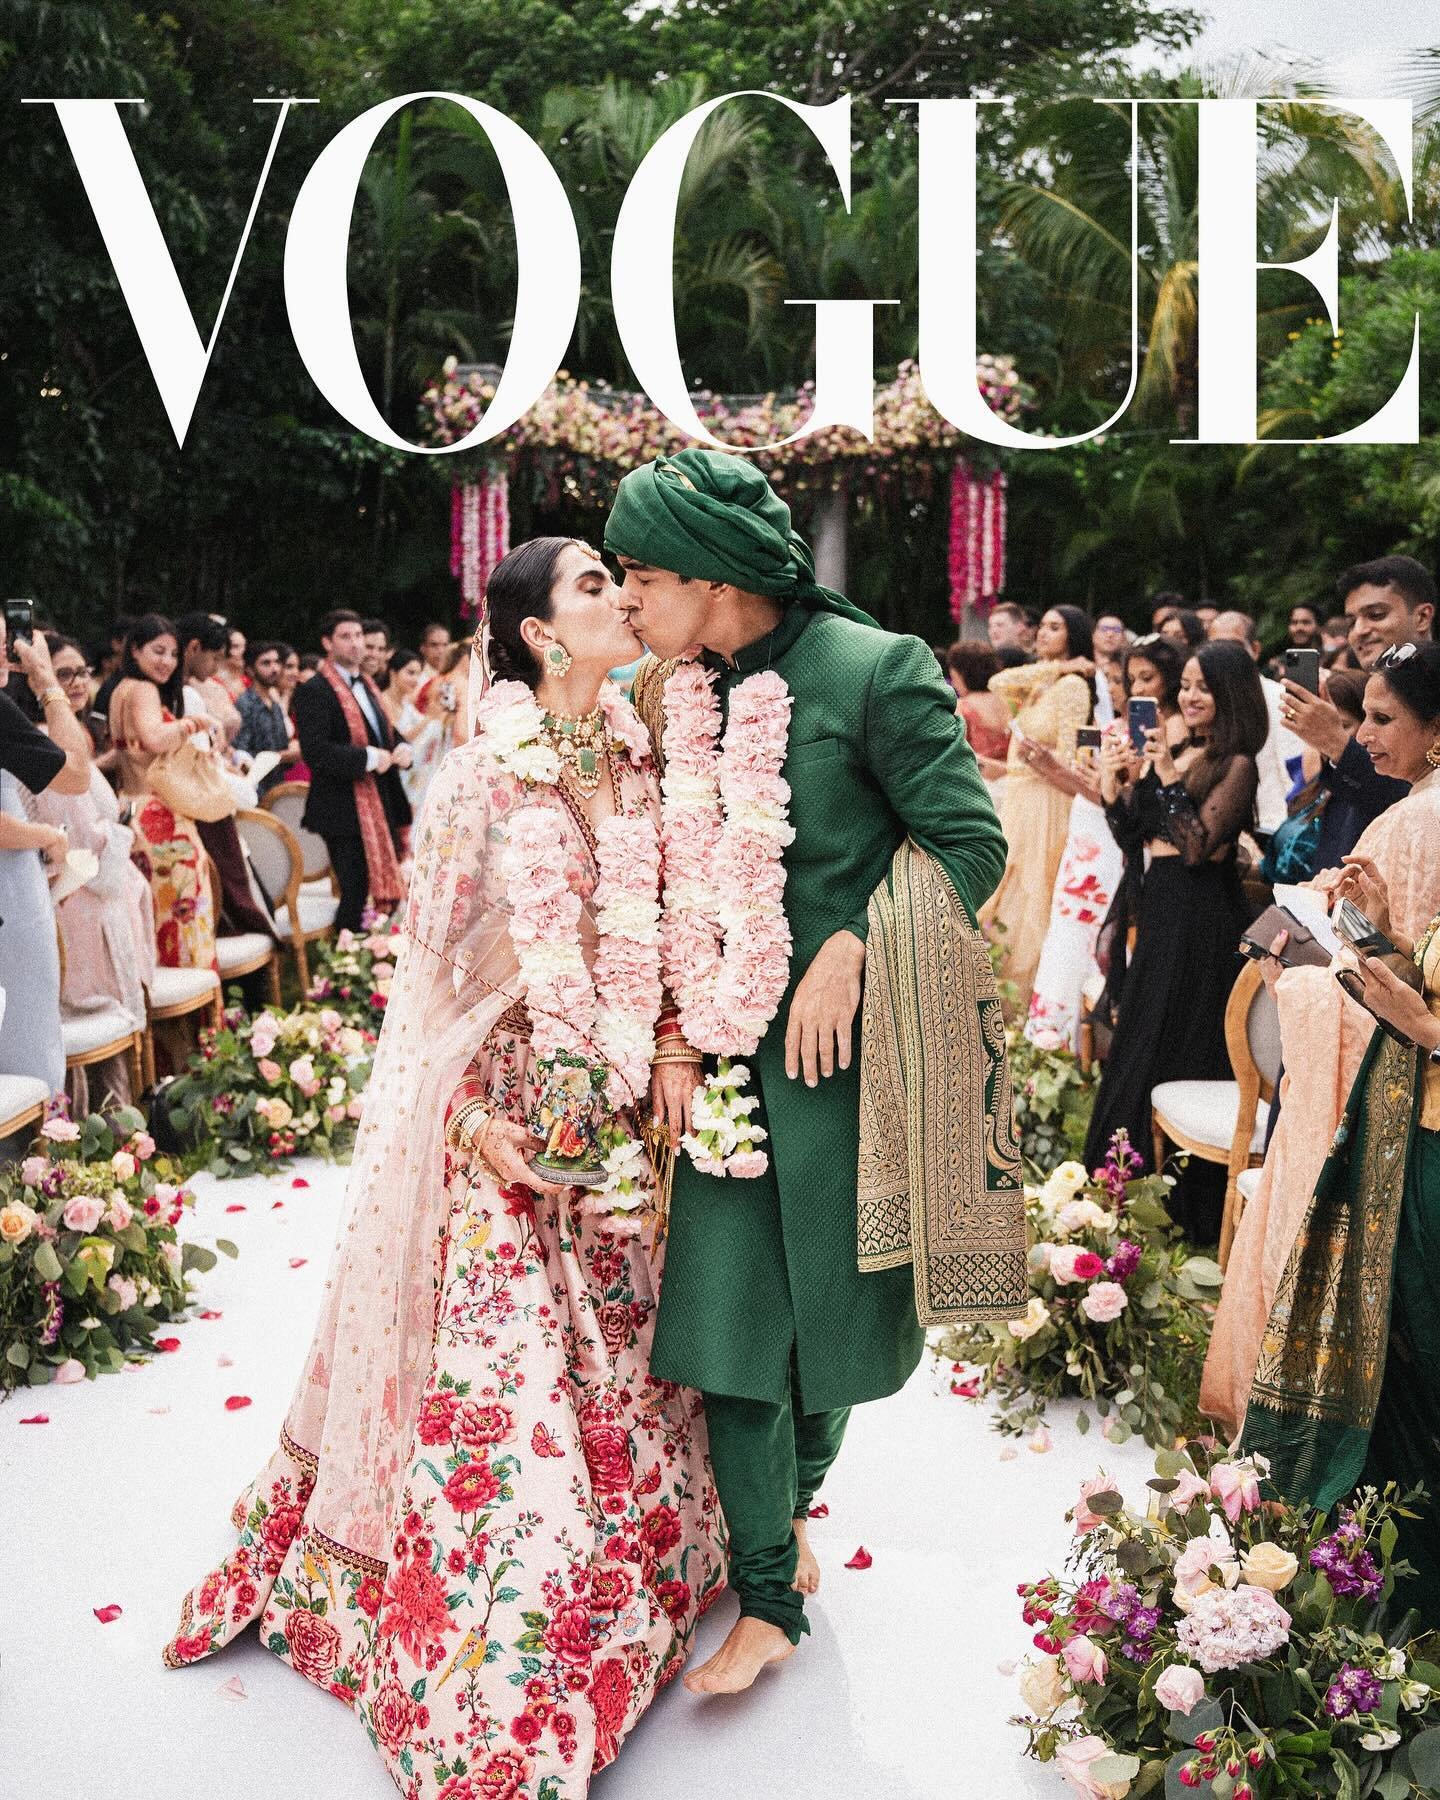 We are live in @vogueindia with the beautiful wedding of @san.city and @shivabrol at the @rwmayakoba. Thank you Sonal @sjsevents for the great colaborations.

Capture: @andreassellinidis 
Wedding Design Planning @sjsevents
Venue @rwmayakoba
Floral an